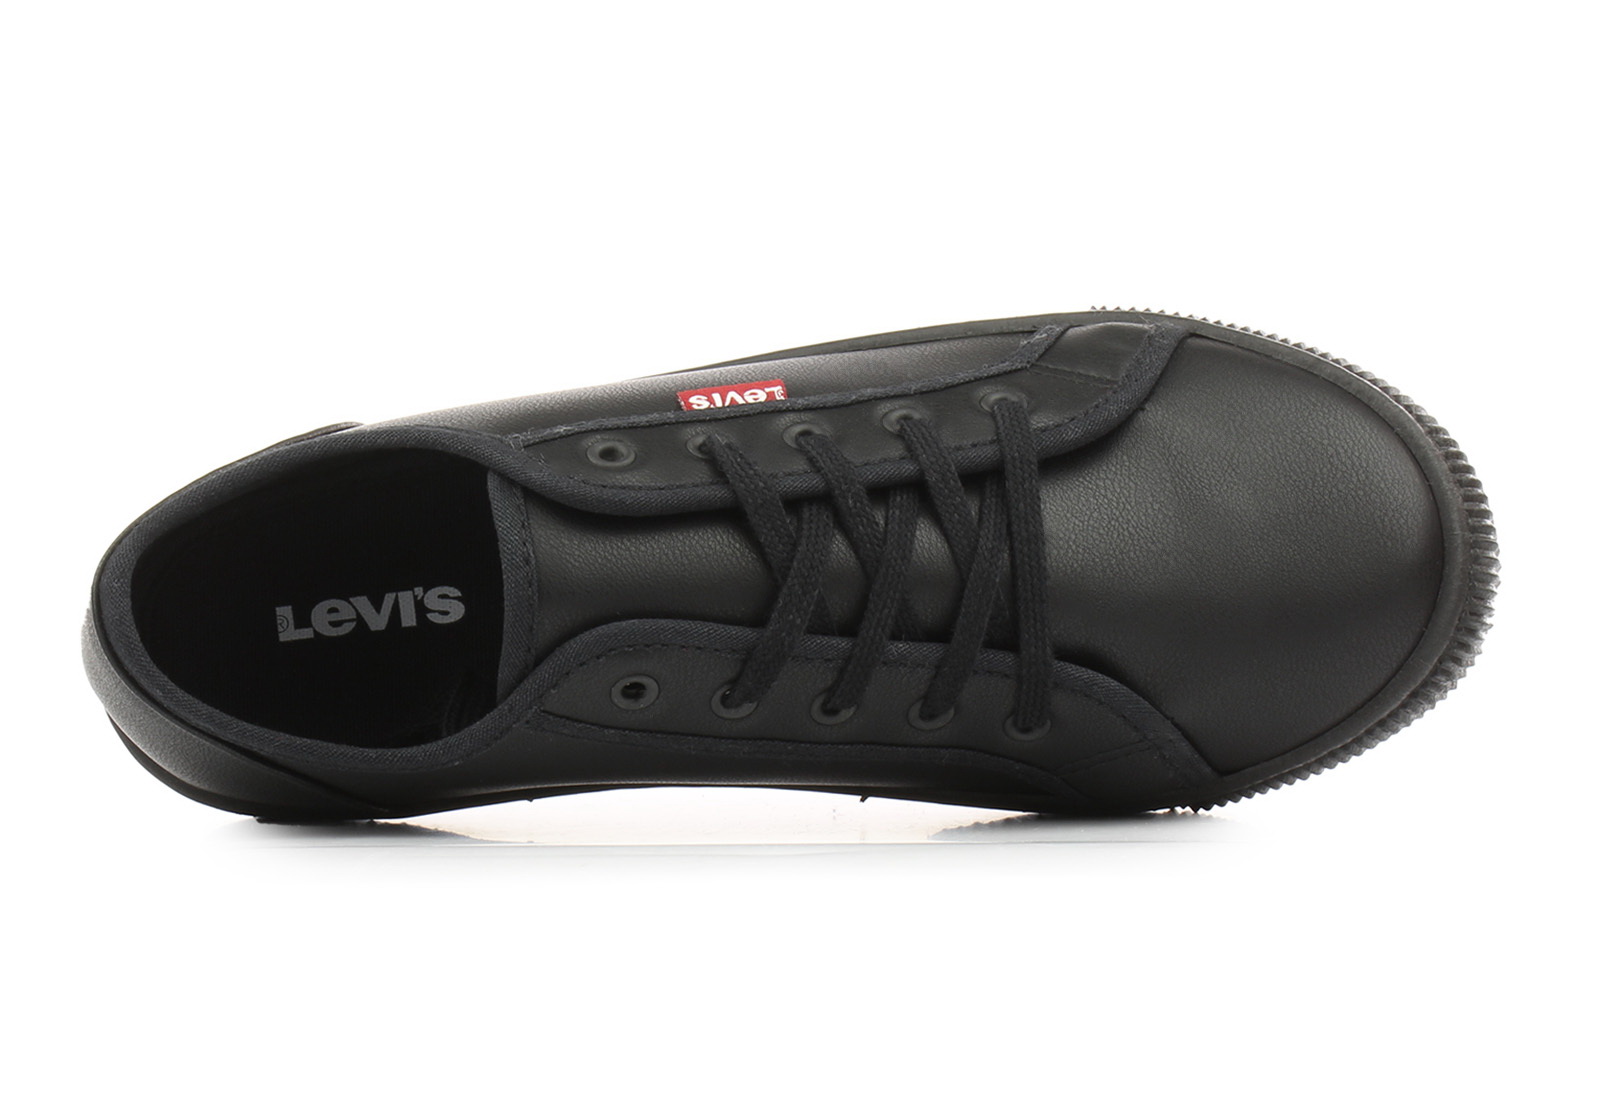 Levis Trainers - Malibu Beach S - 225849-661-559 - Online shop for  sneakers, shoes and boots